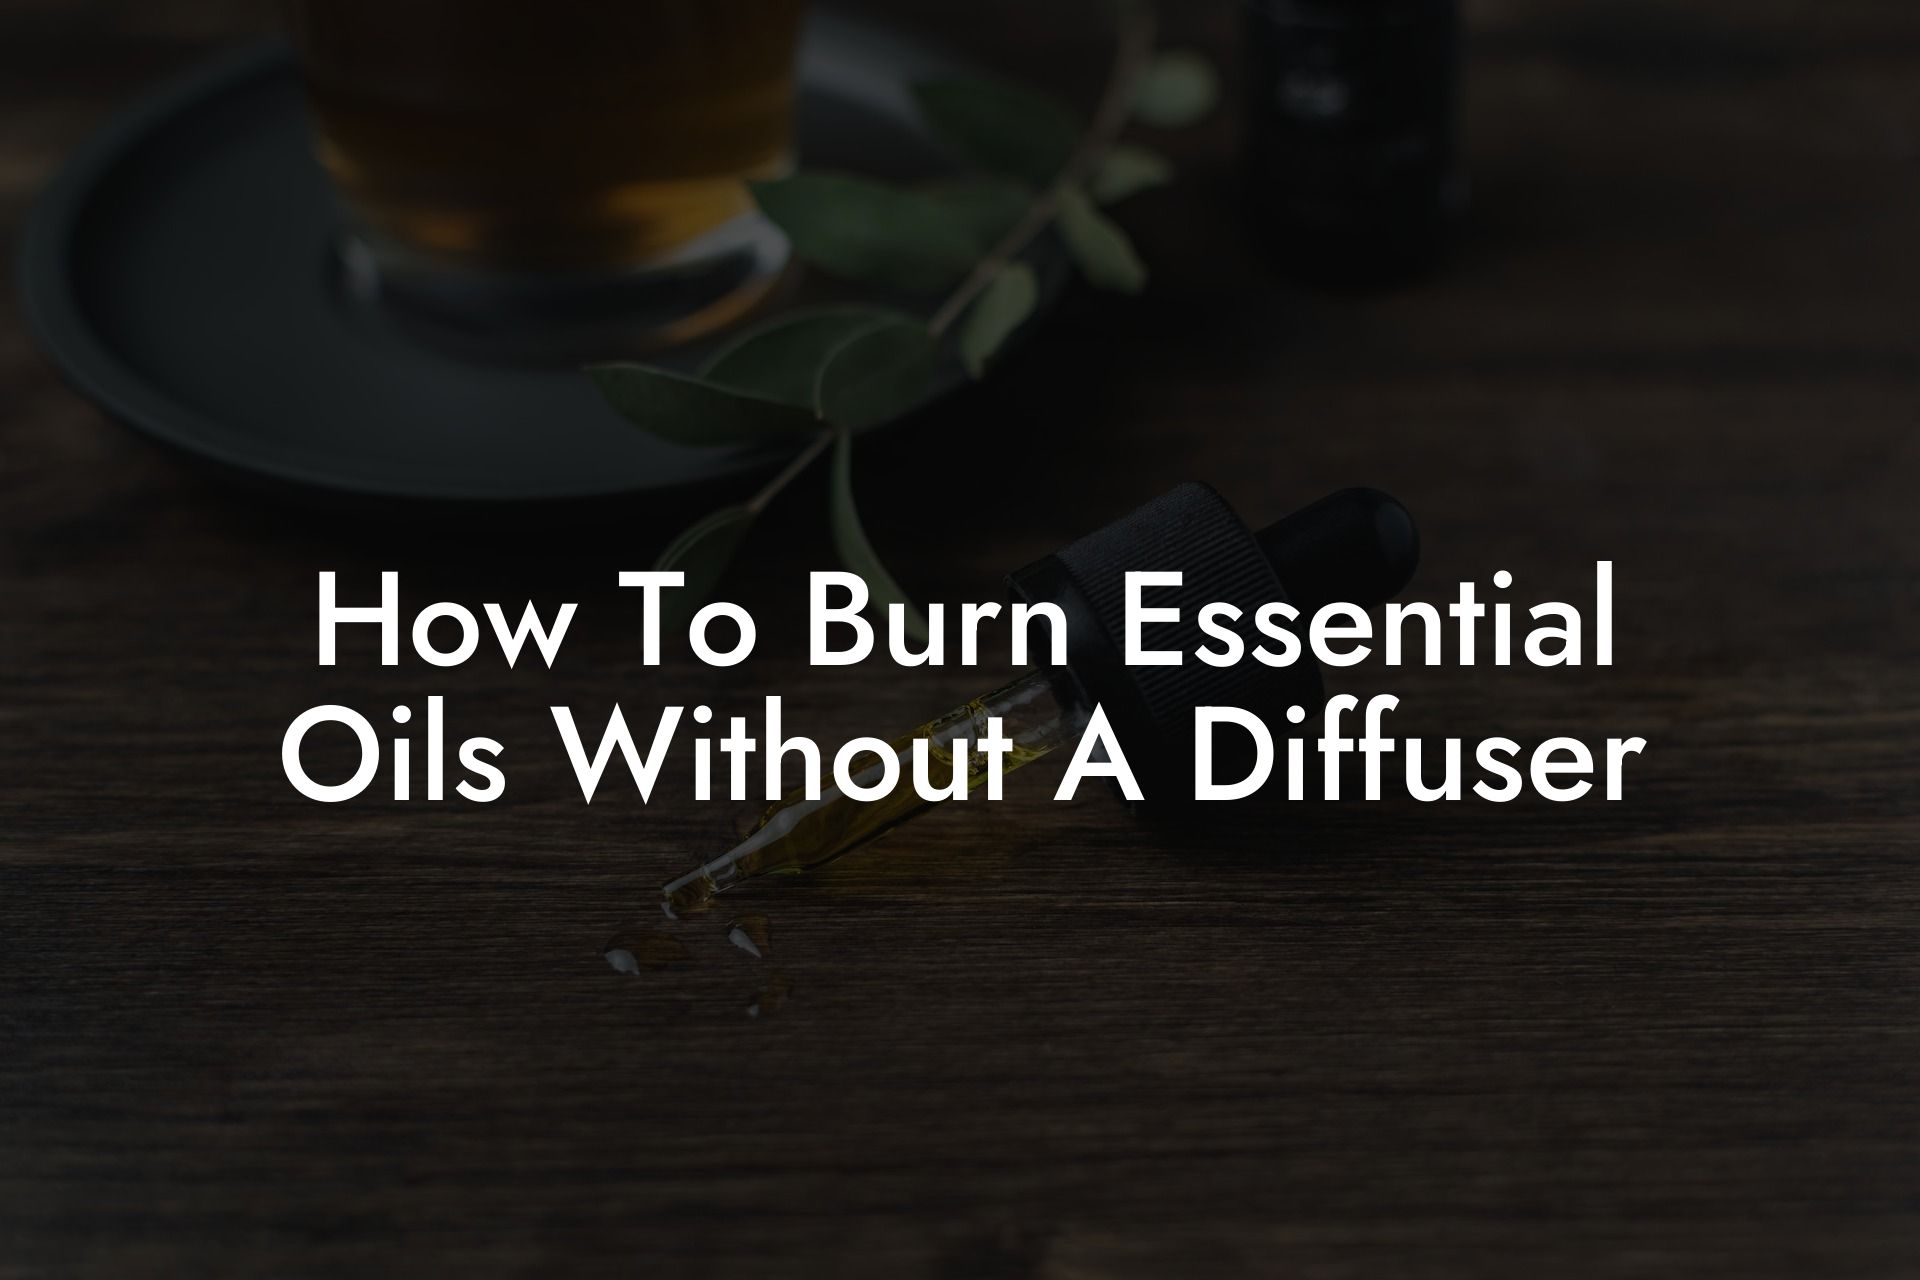 How To Burn Essential Oils Without A Diffuser